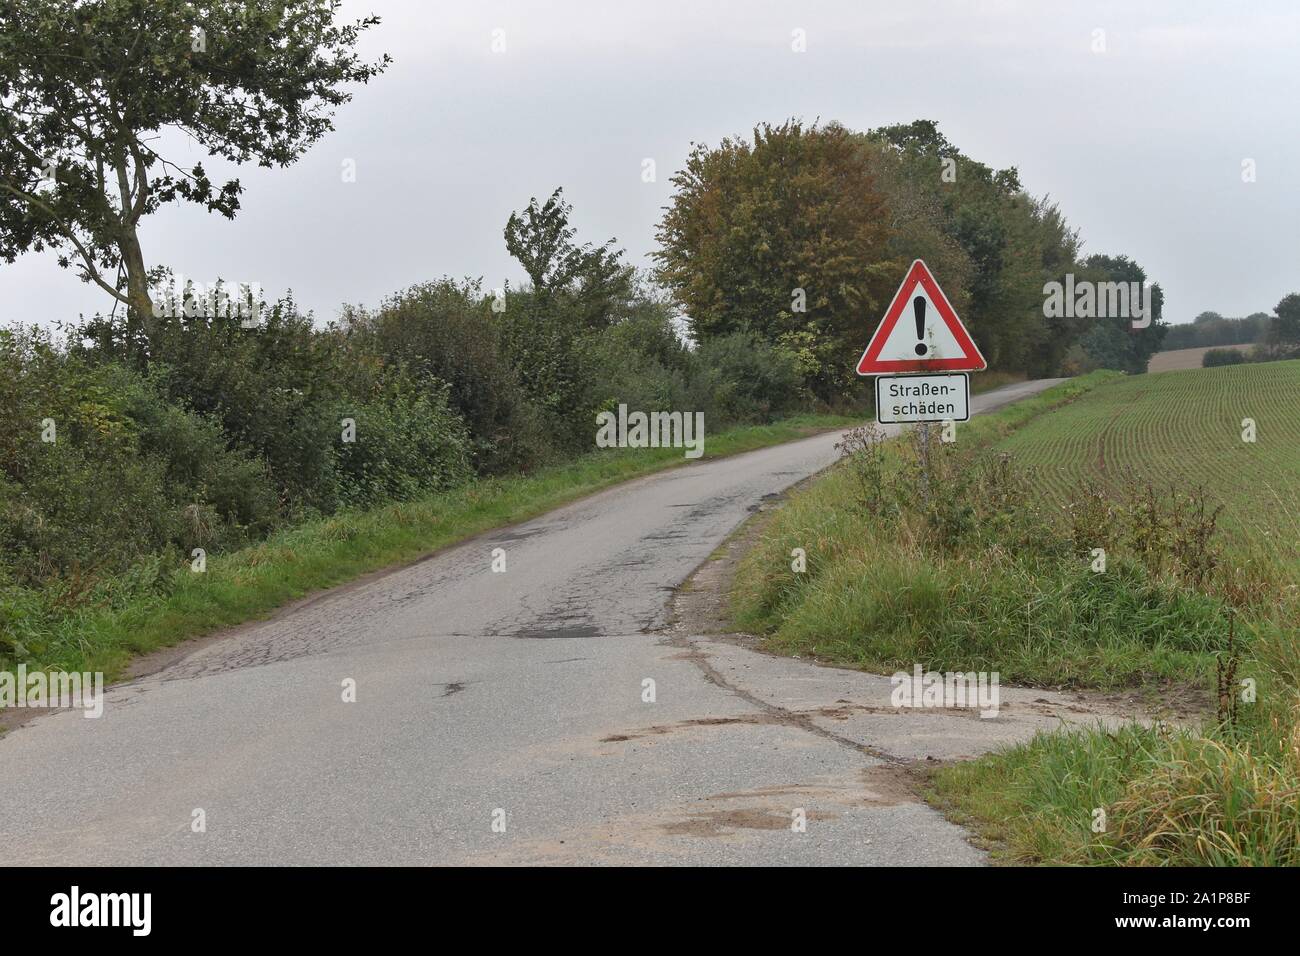 Road sign warning of road surface damage in german. Roadside damage is visible, starting next to the sign. Stock Photo